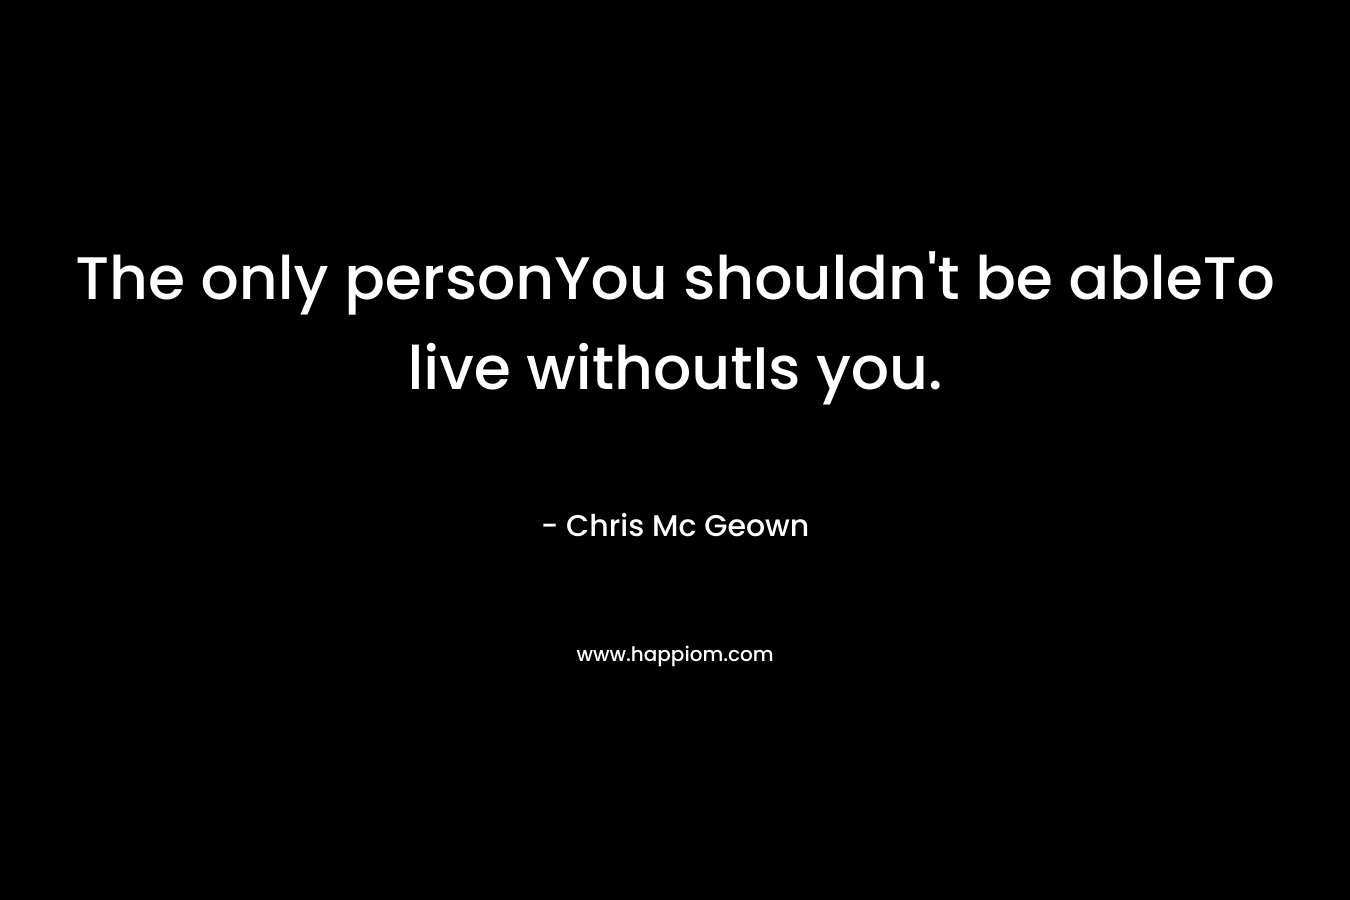 The only personYou shouldn’t be ableTo live withoutIs you. – Chris Mc Geown